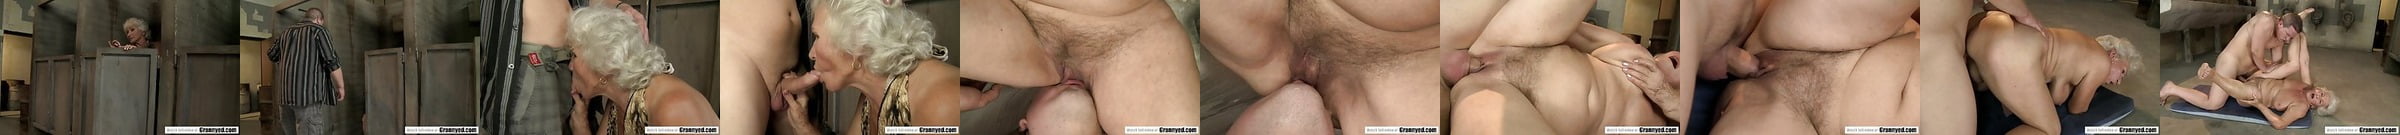 Shameless Sex With Granny In The Bathromm Free Hd Porn 8a Xhamster 